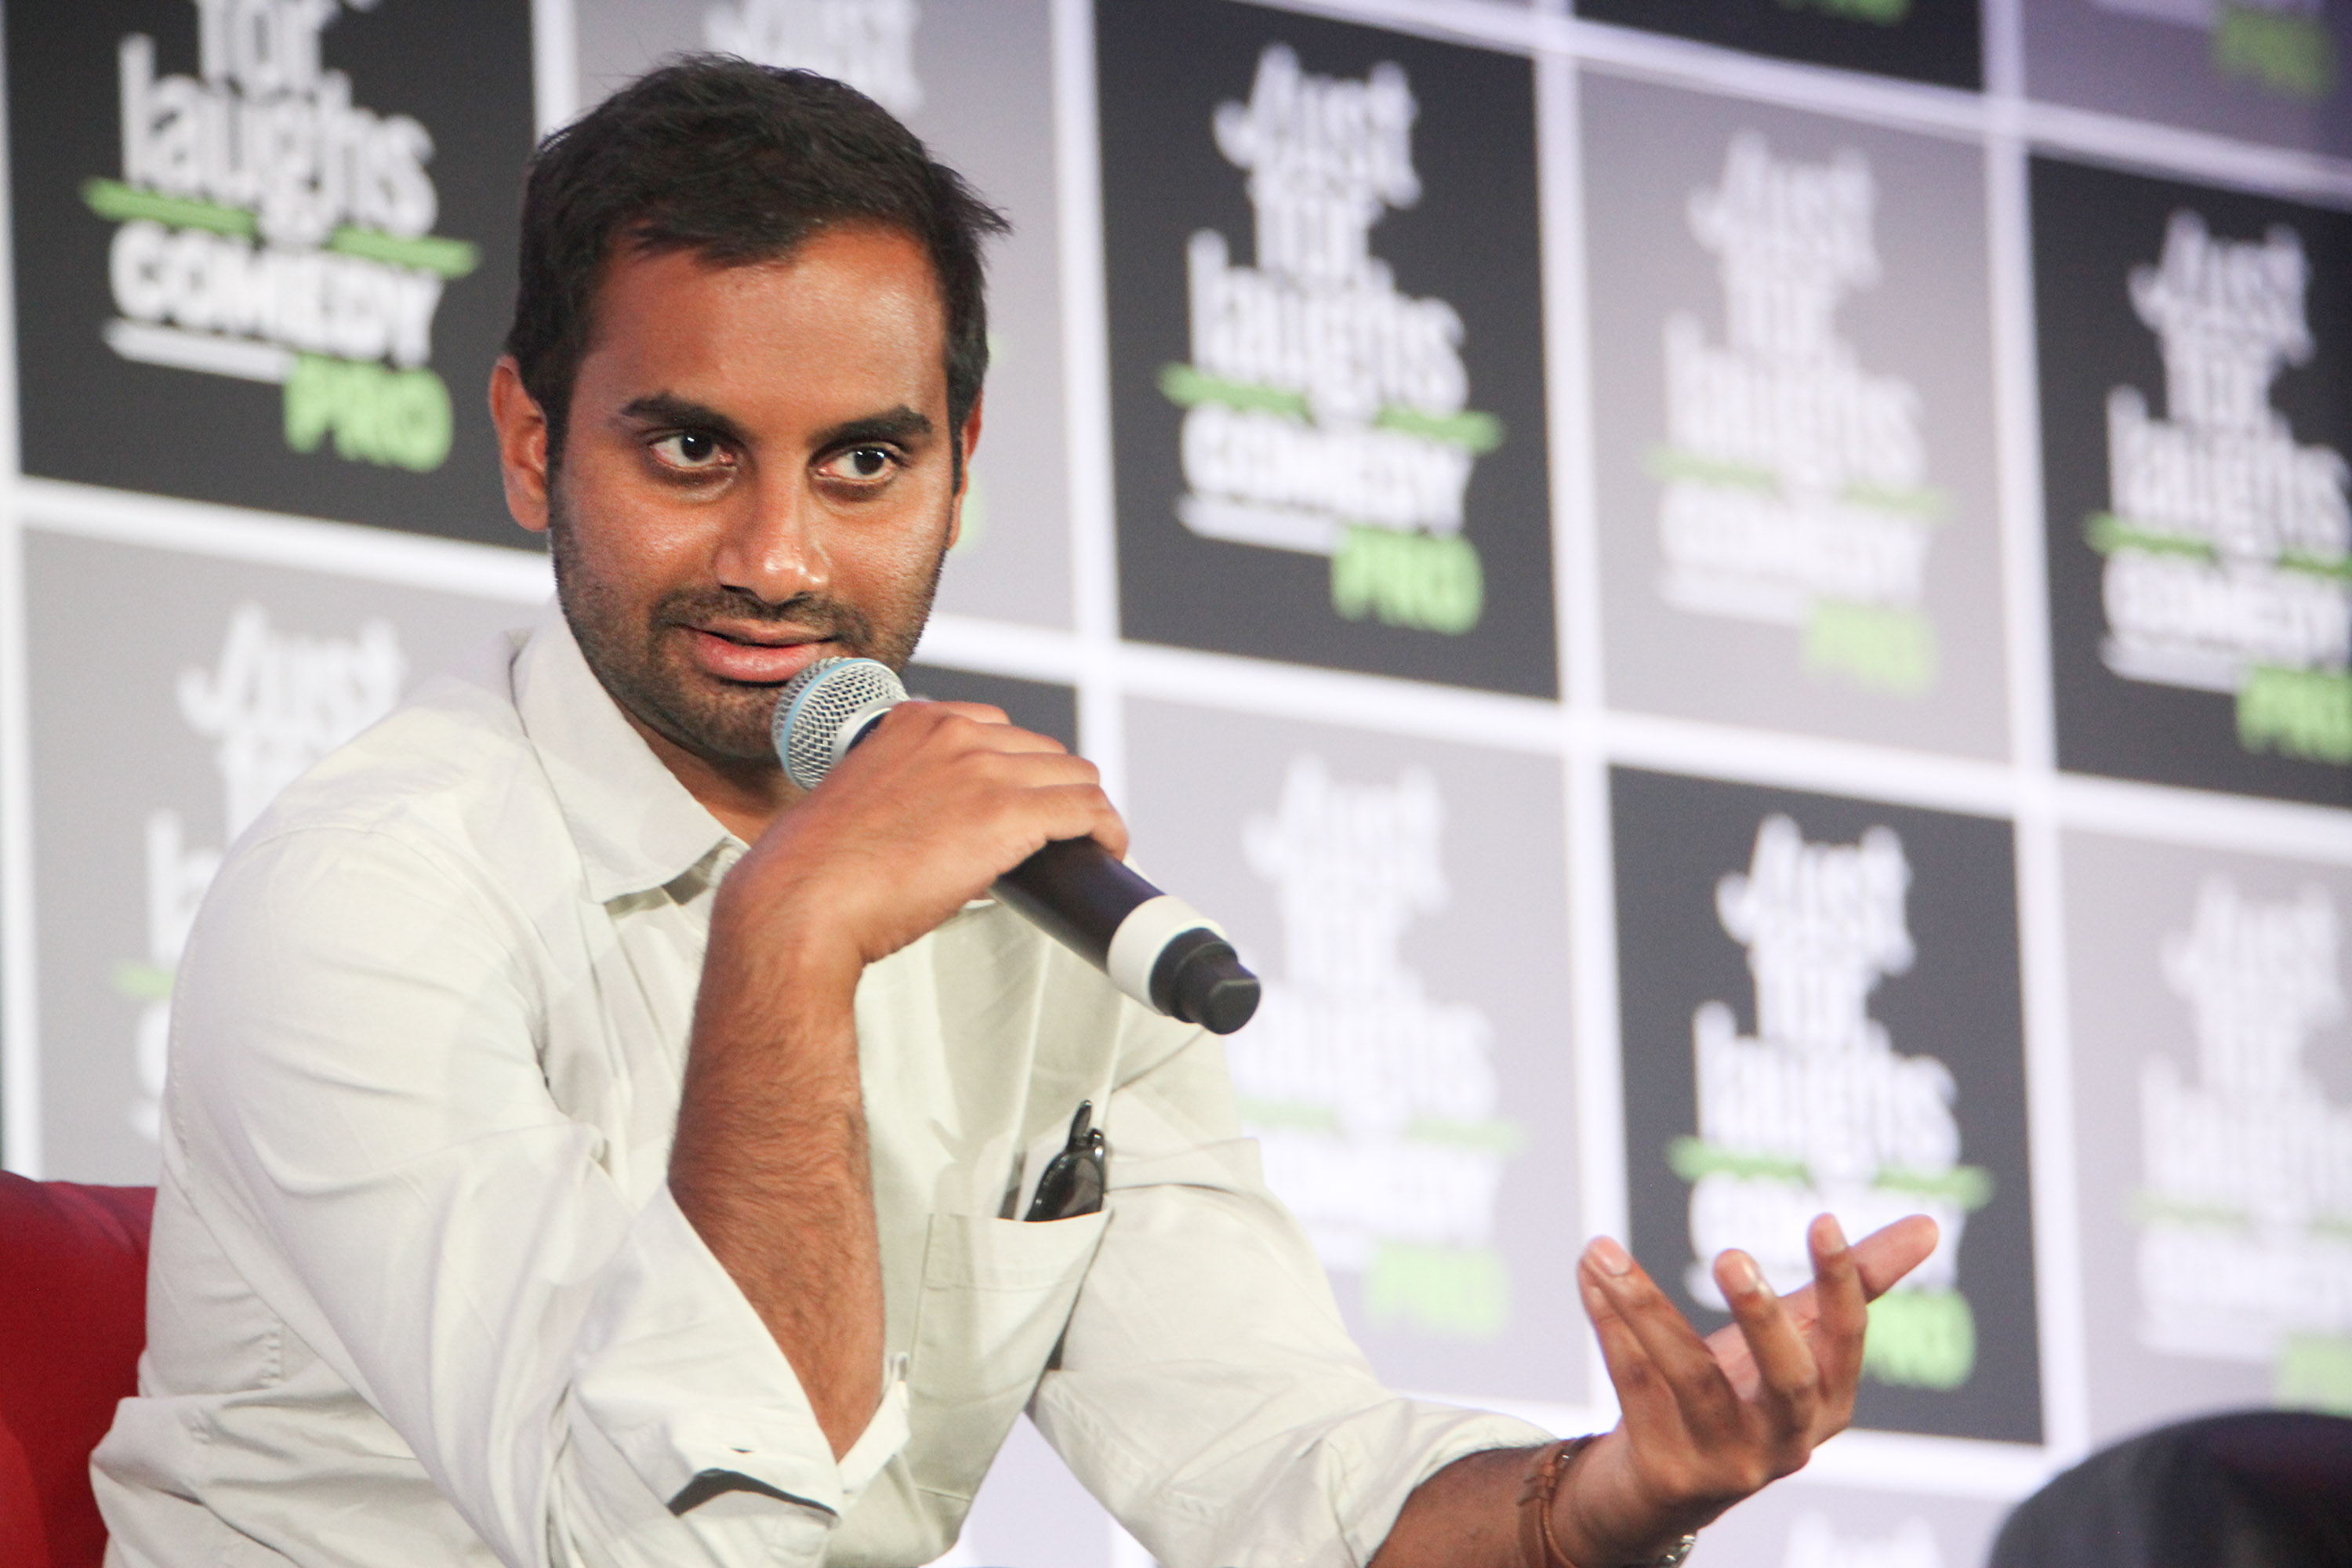 Comedian/Actor Aziz Ansari attends Master of None cast panel at Just for Laughs Comedy Festival held at The Hyatt Regency Montreal on July 29, 2016 in Montreal, Canada. (GP Images—WireImage)